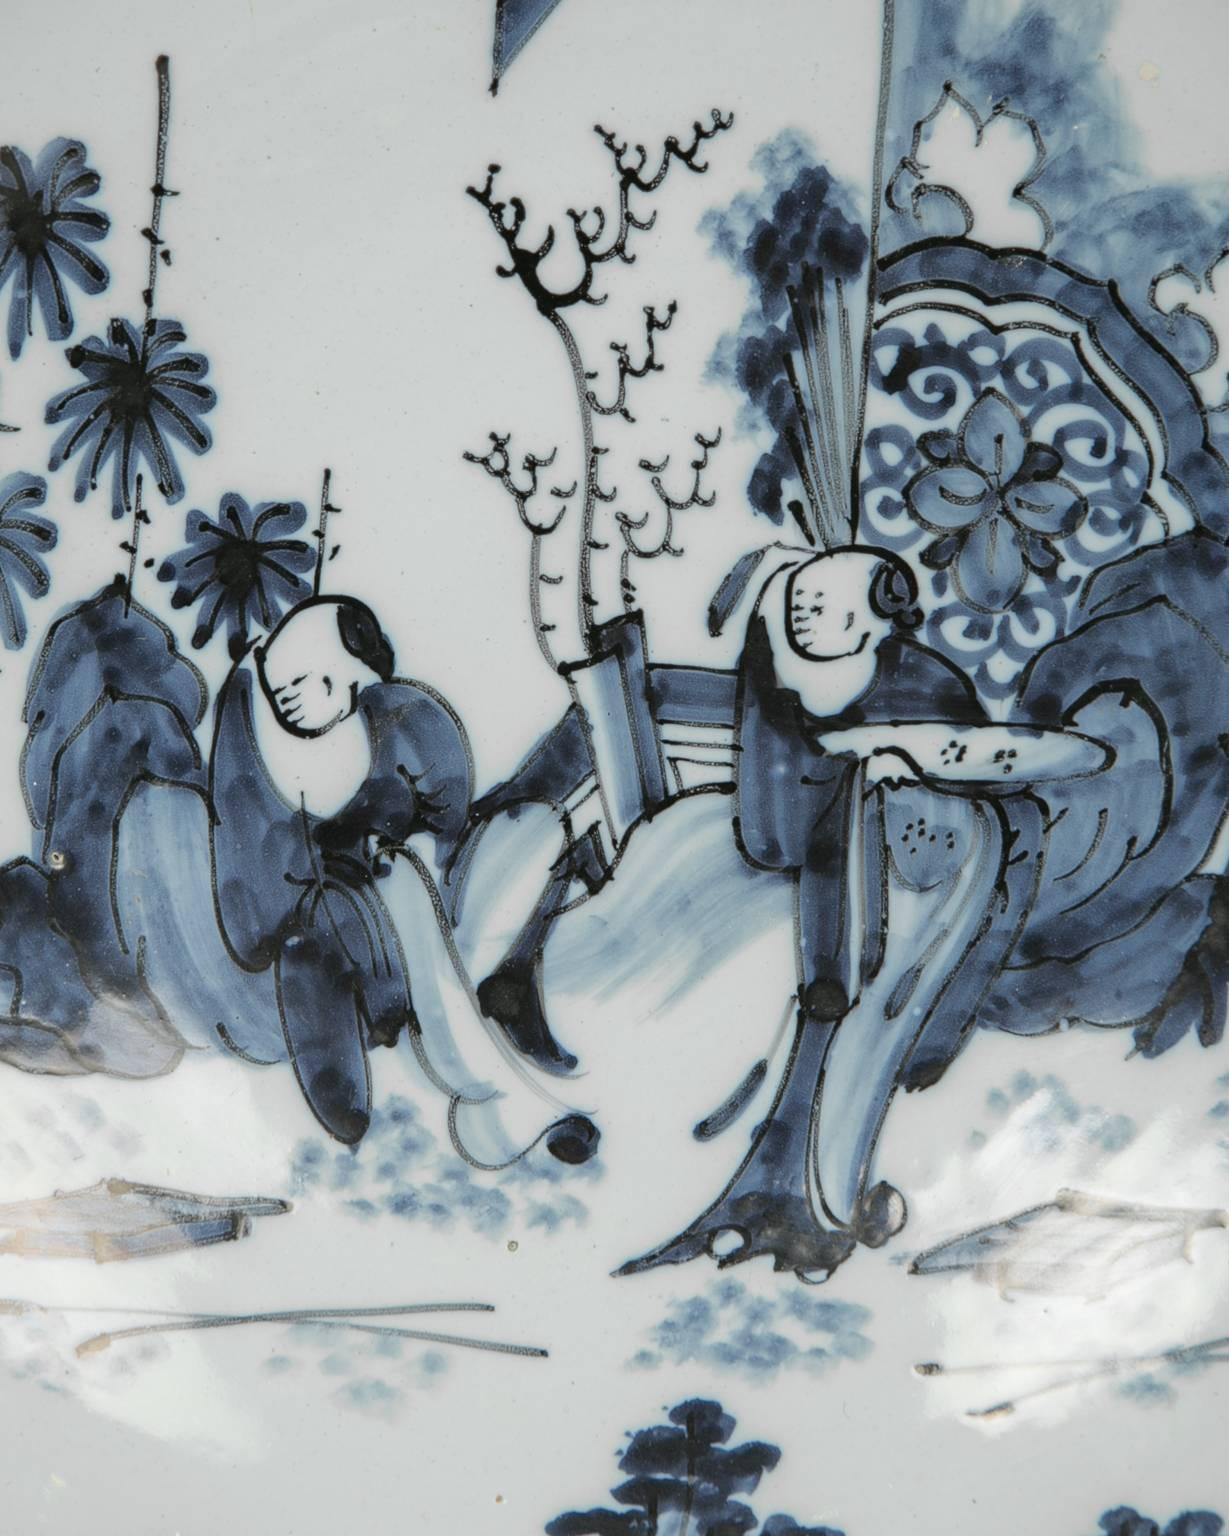 We are pleased to offer this very special early to mid-17th century (1640-1650) blue and white Delft charger with a Chinese inspired theme. The Delft potter adopted a free and spontaneous style of painting, which recalls Chinese blue and white